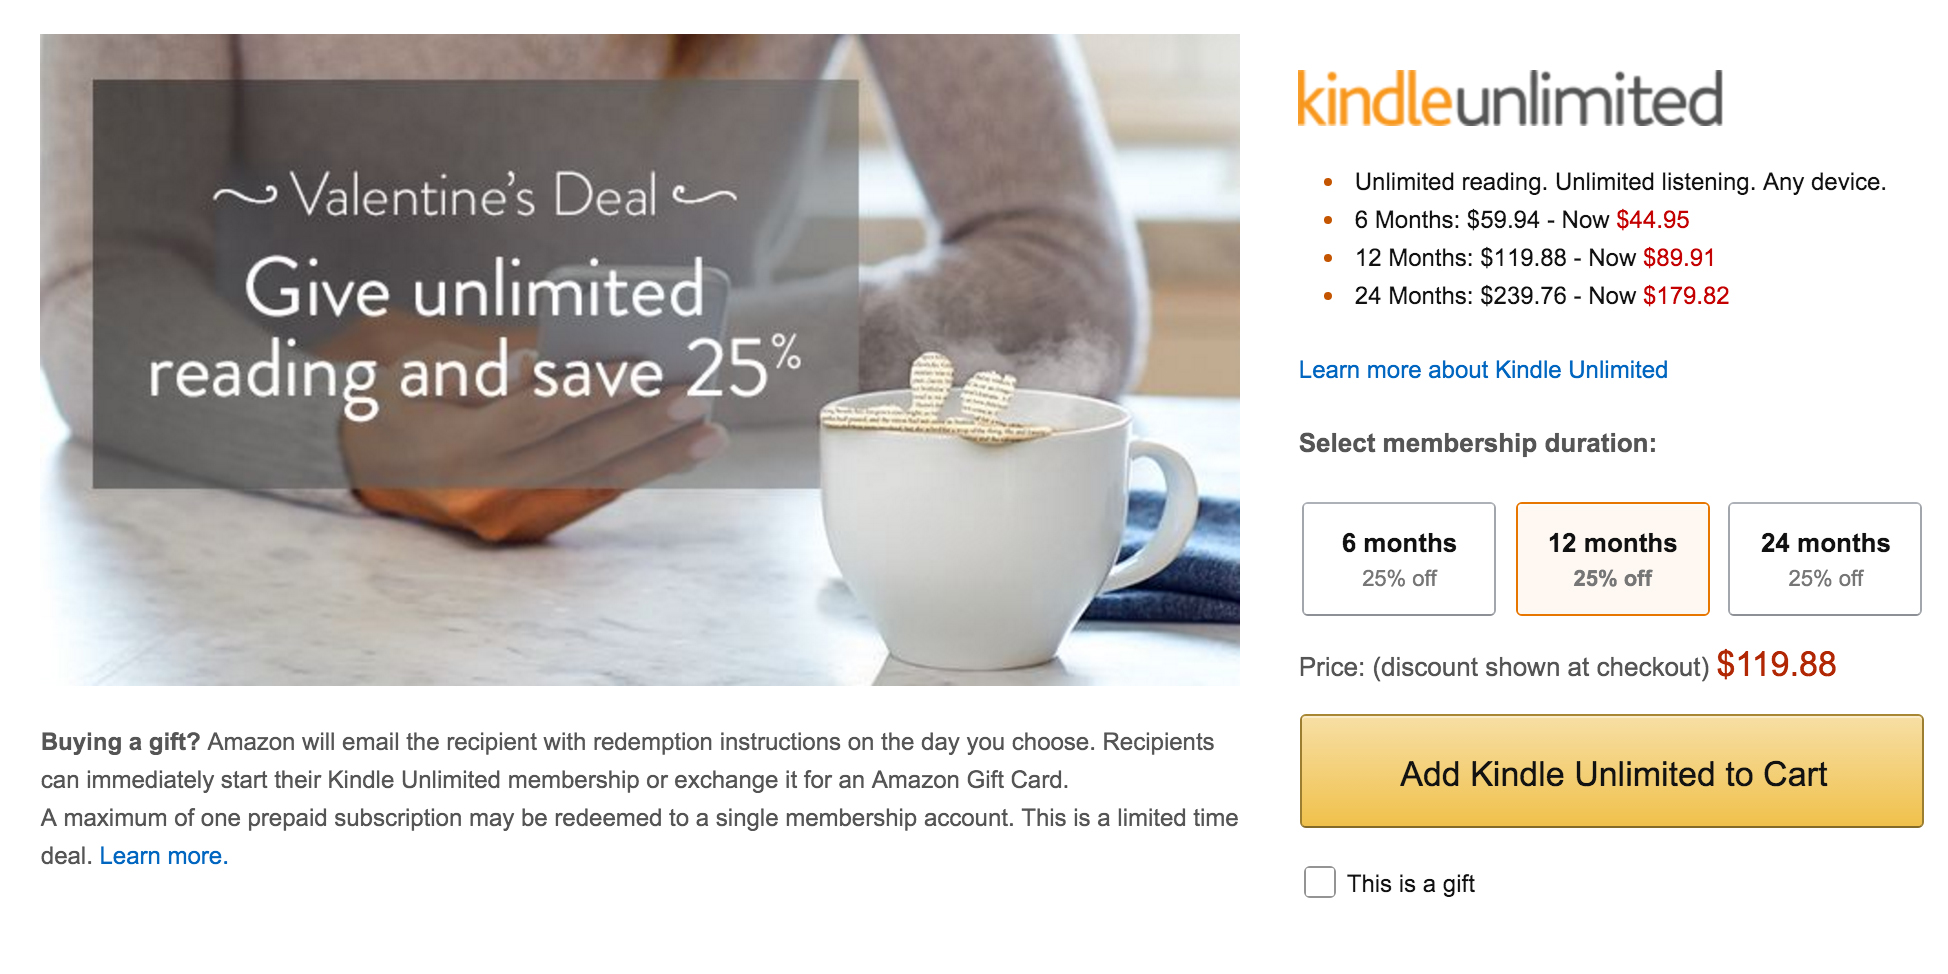 amazon-offers-rare-25-discount-on-kindle-unlimited-subscriptions-6